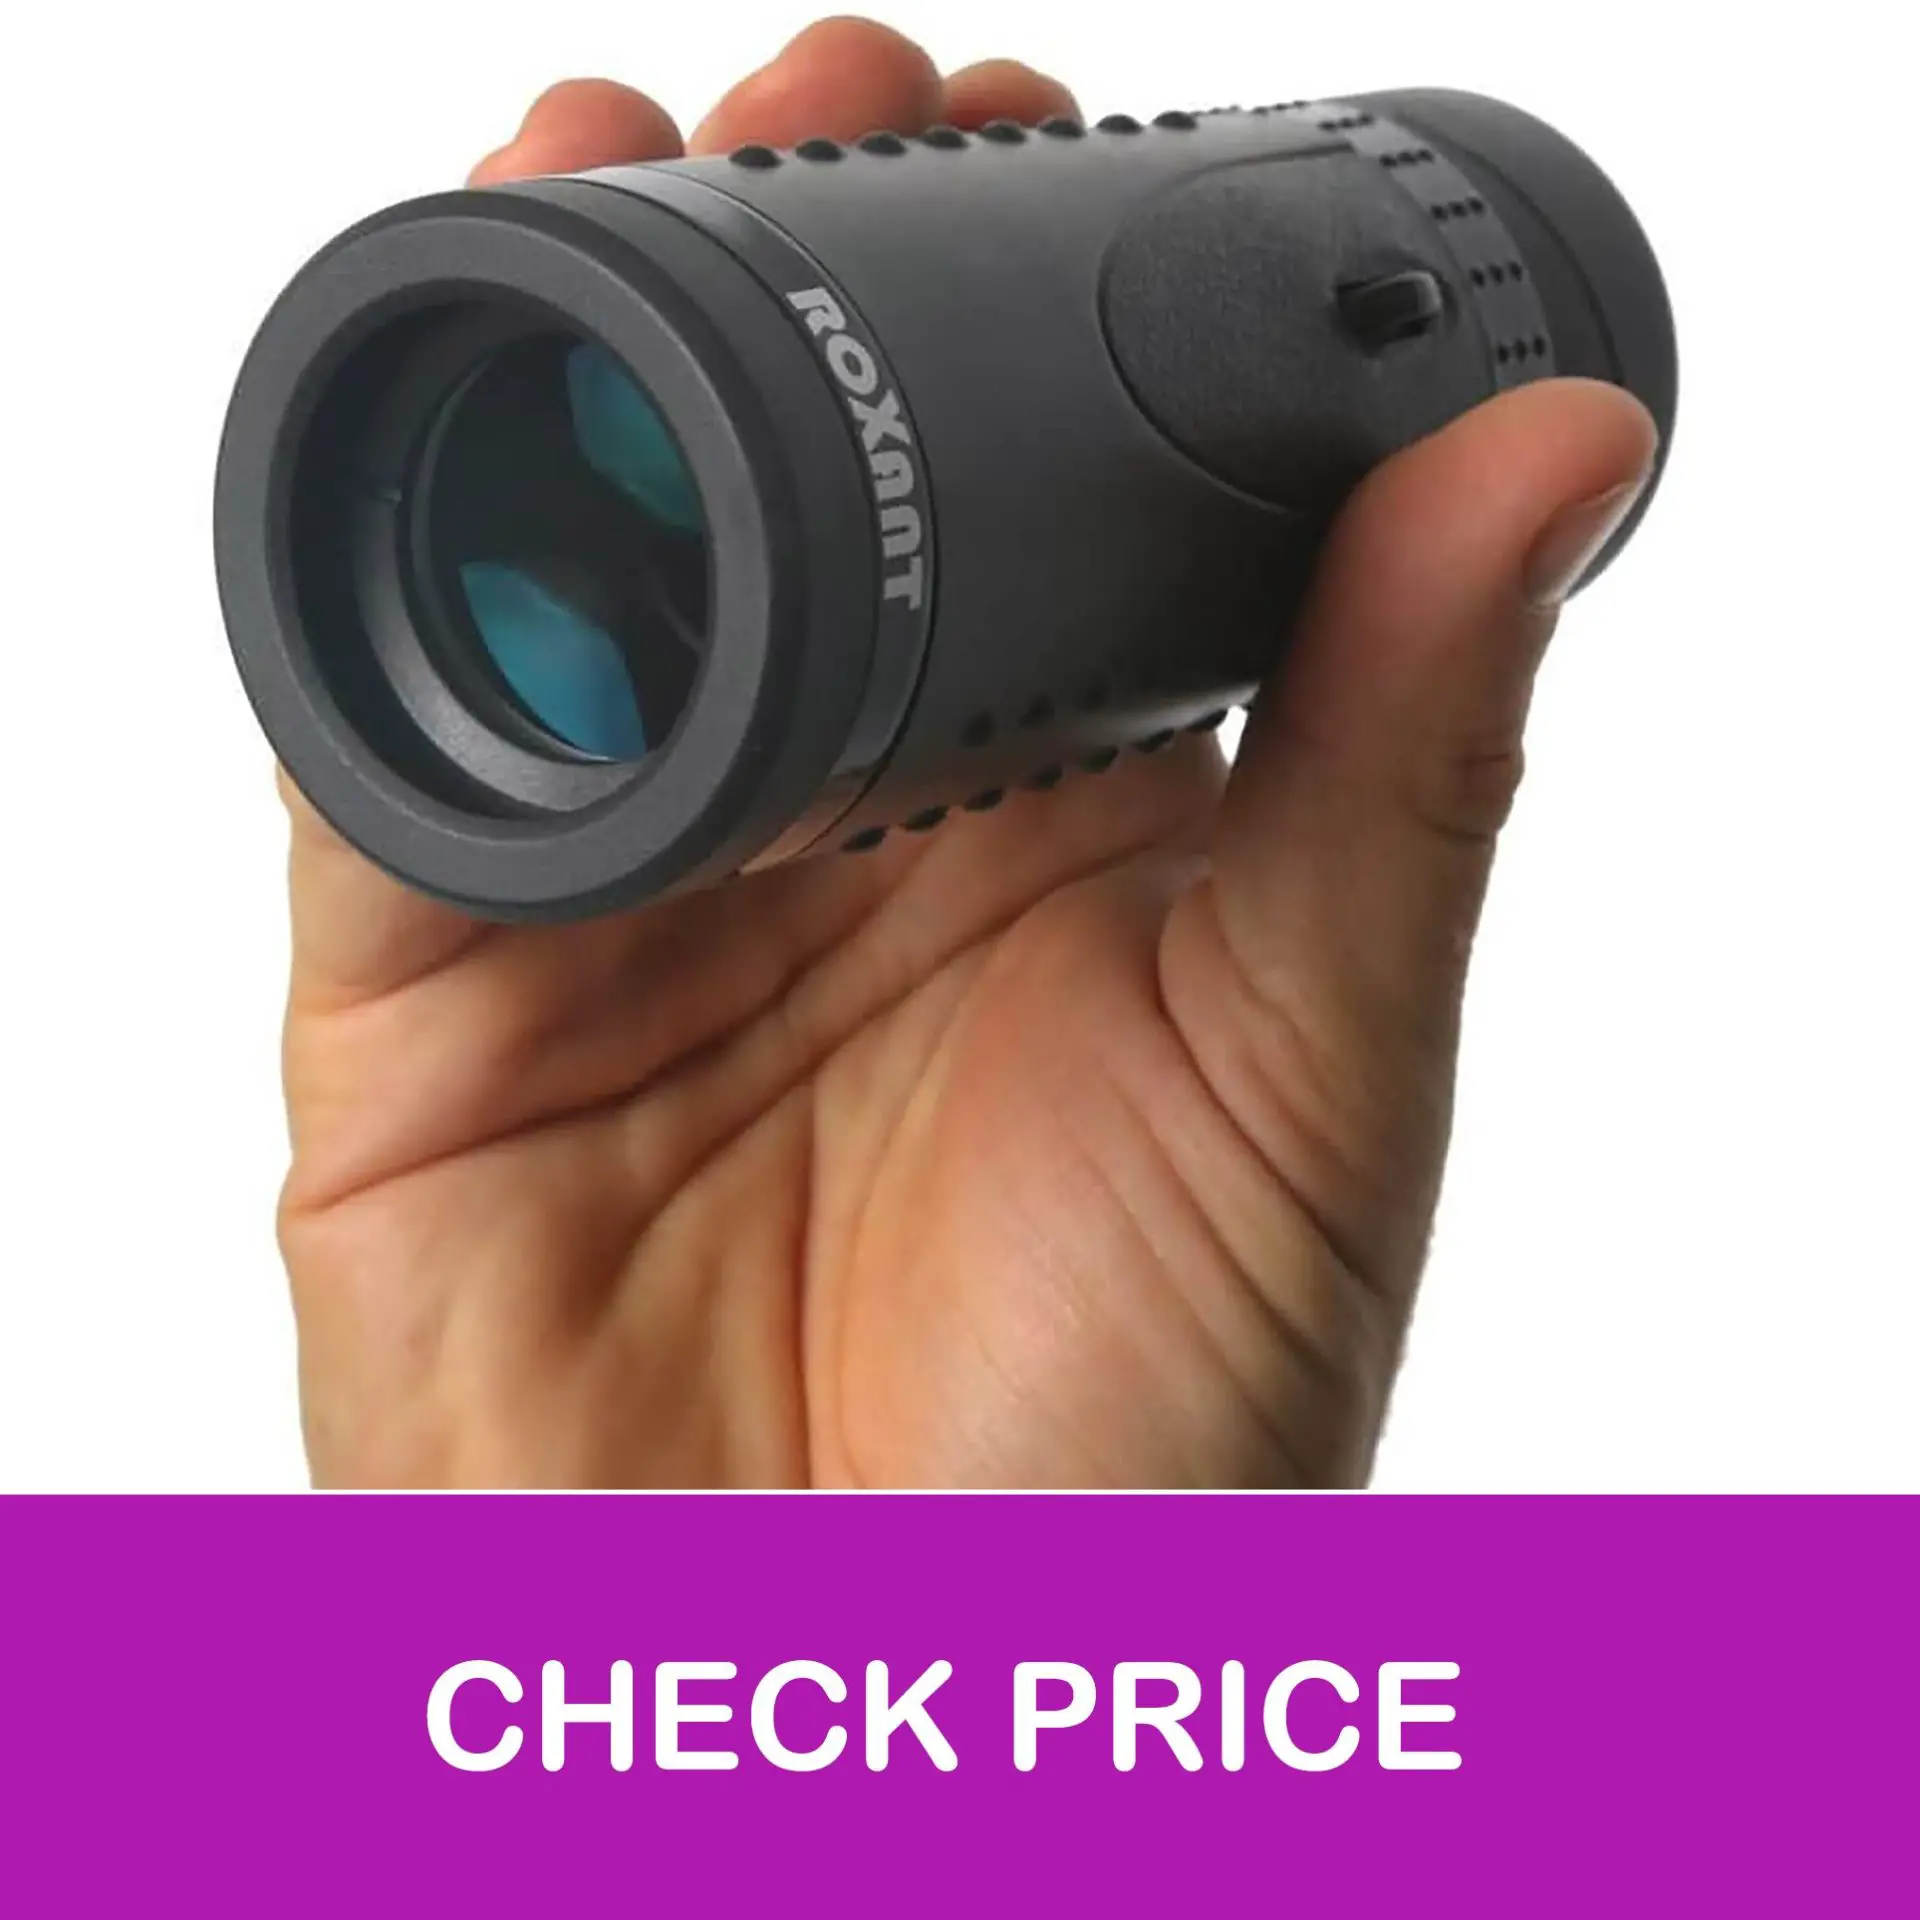 ROXANT Grip Scope High-Definition Wide View Monocular